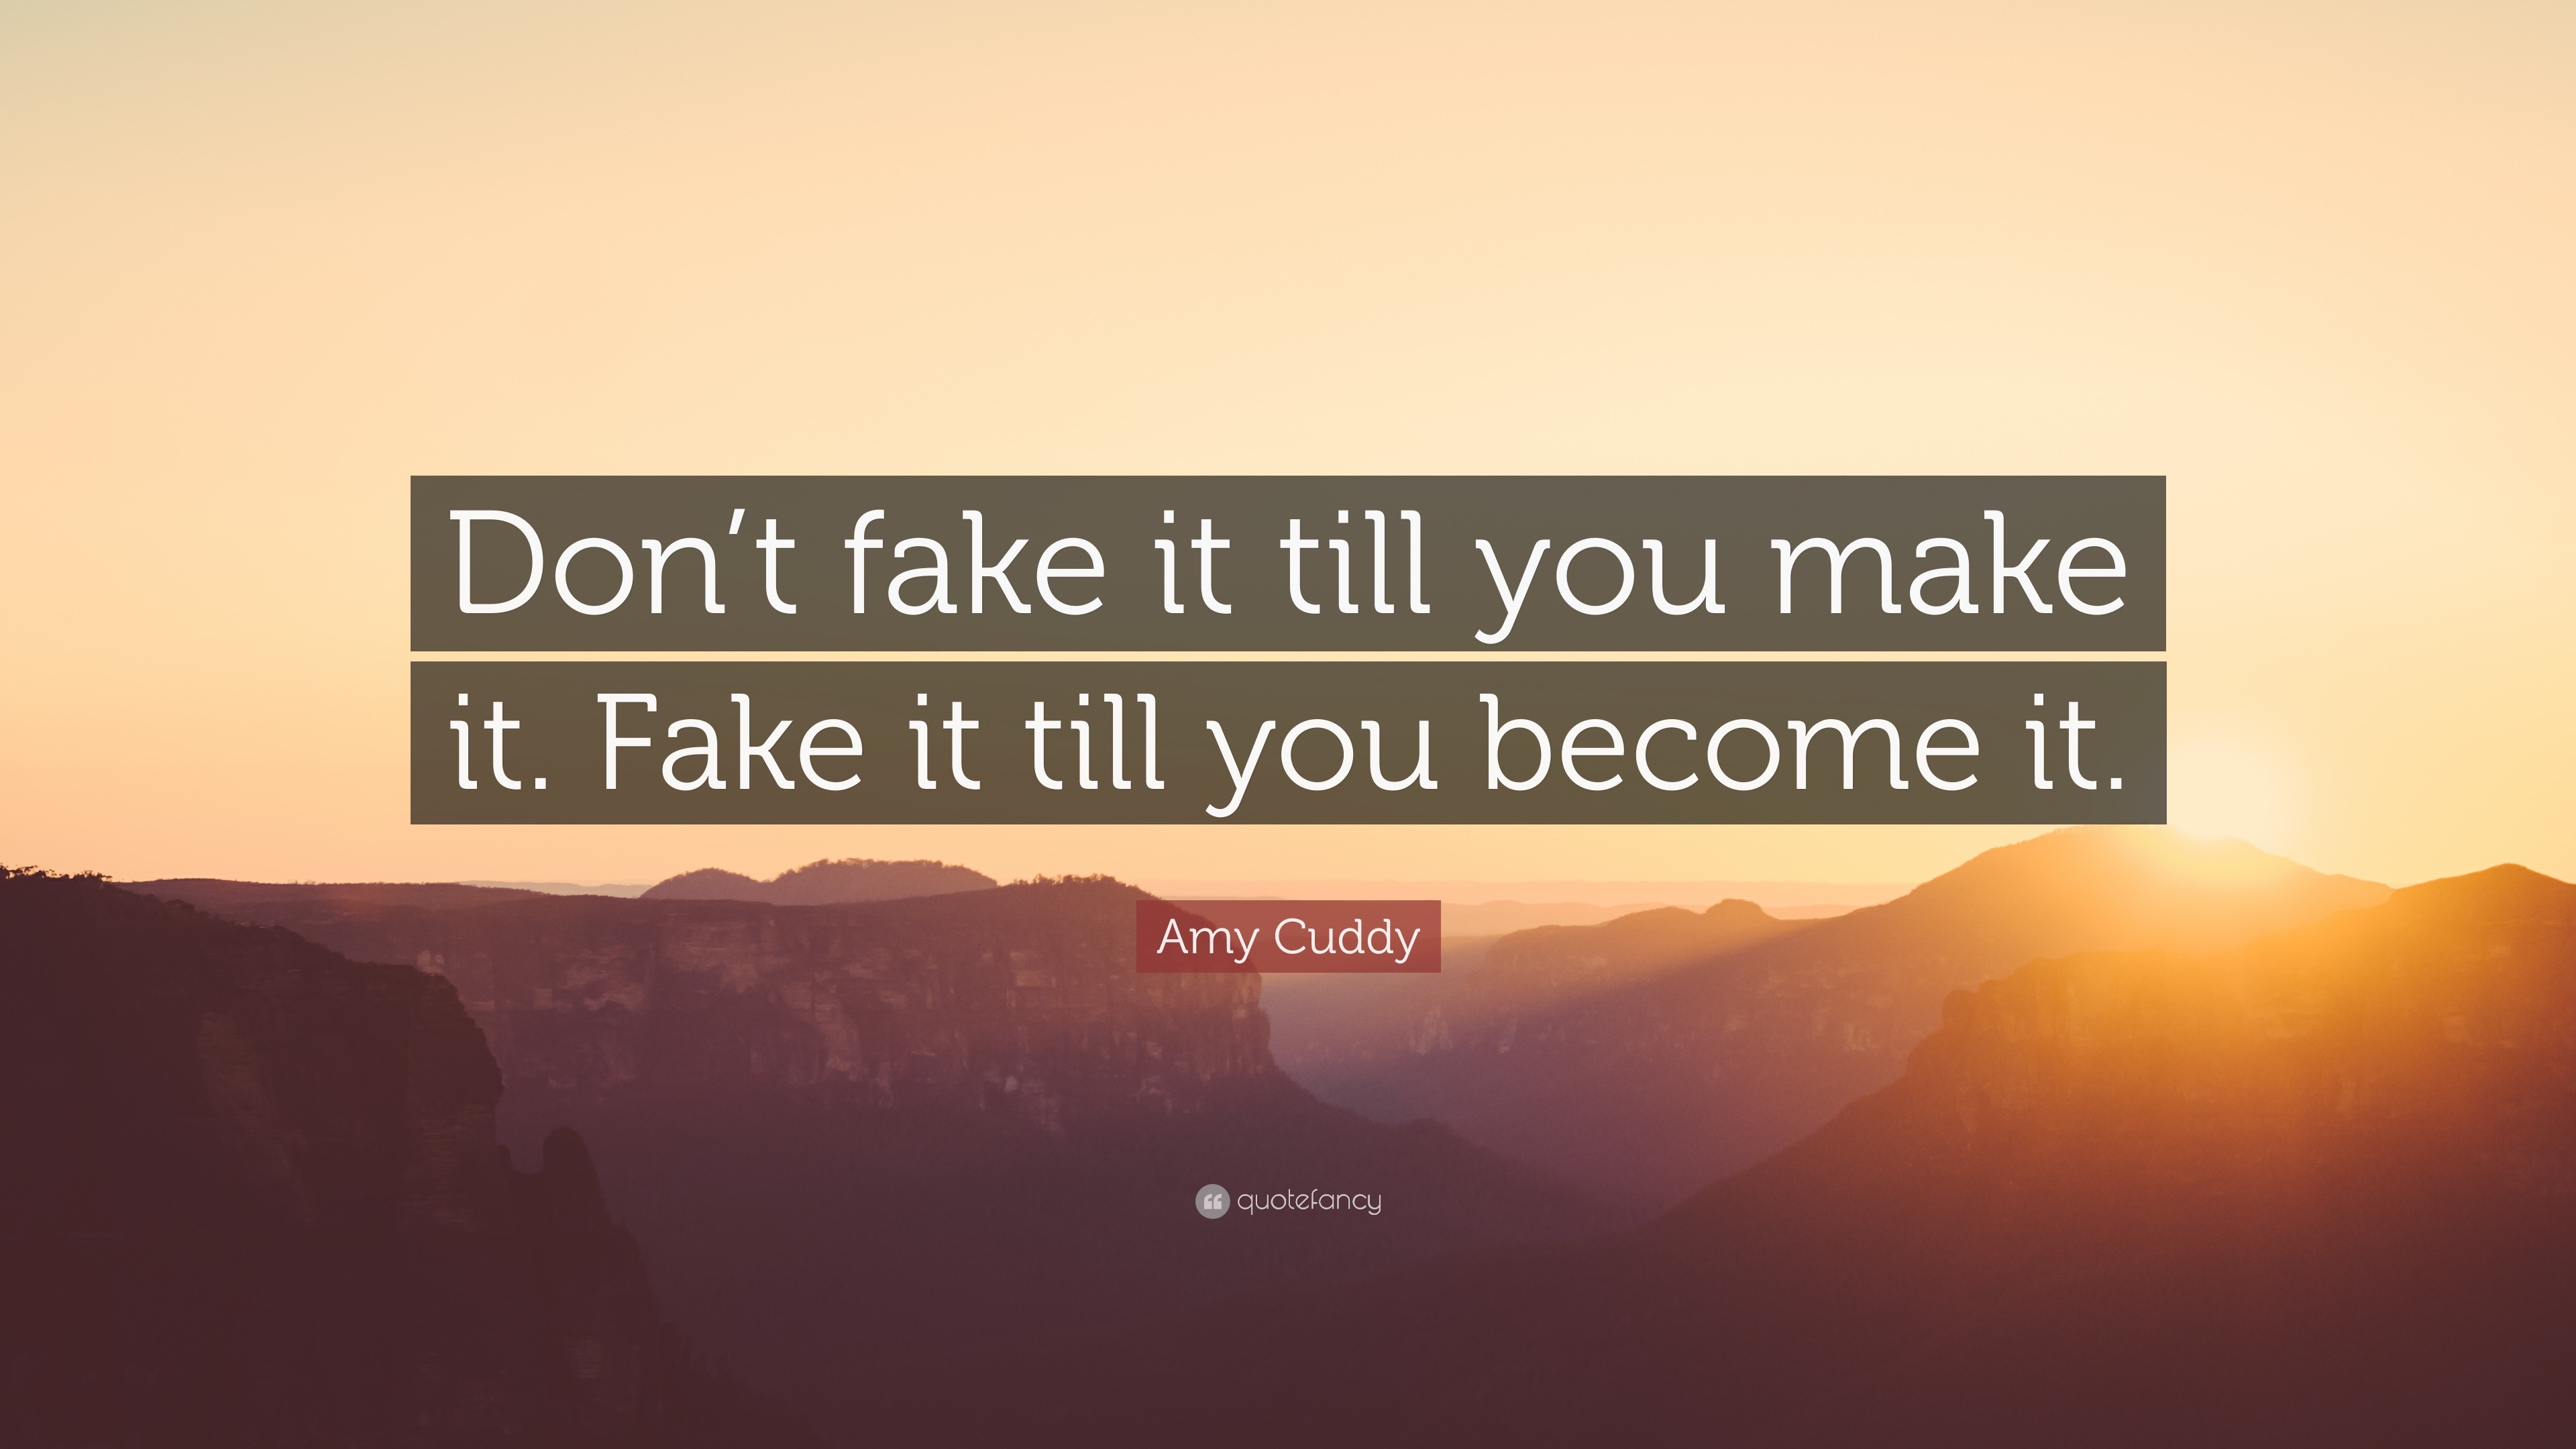 Amy Cuddy Quote: “Don't Fake It Till You Make It. Fake It Till You Become